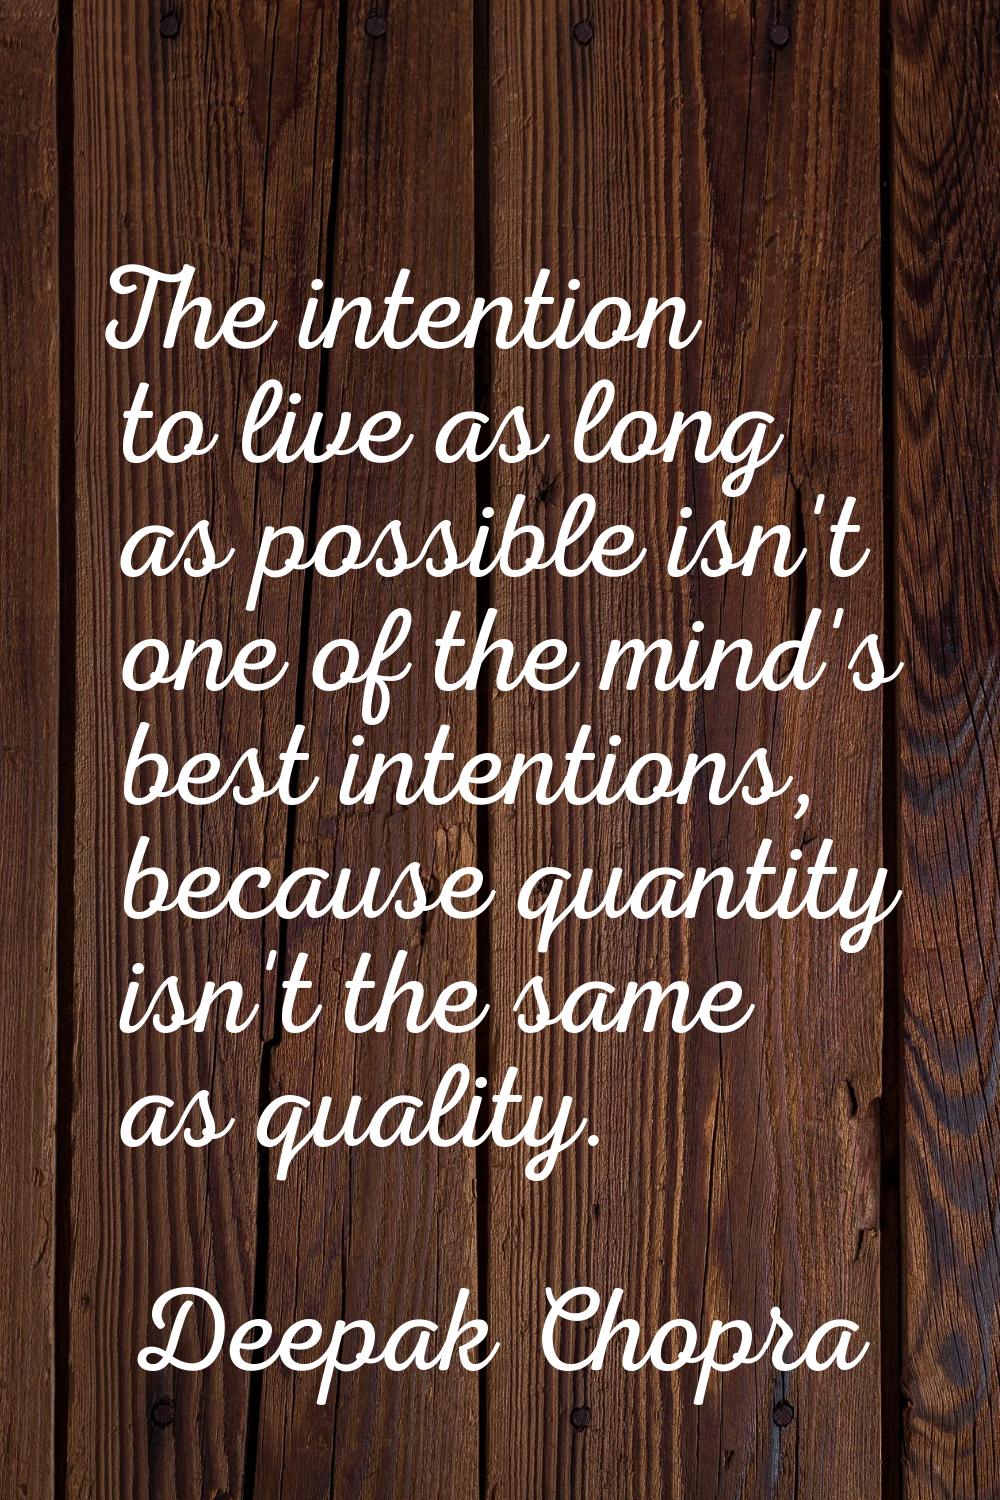 The intention to live as long as possible isn't one of the mind's best intentions, because quantity